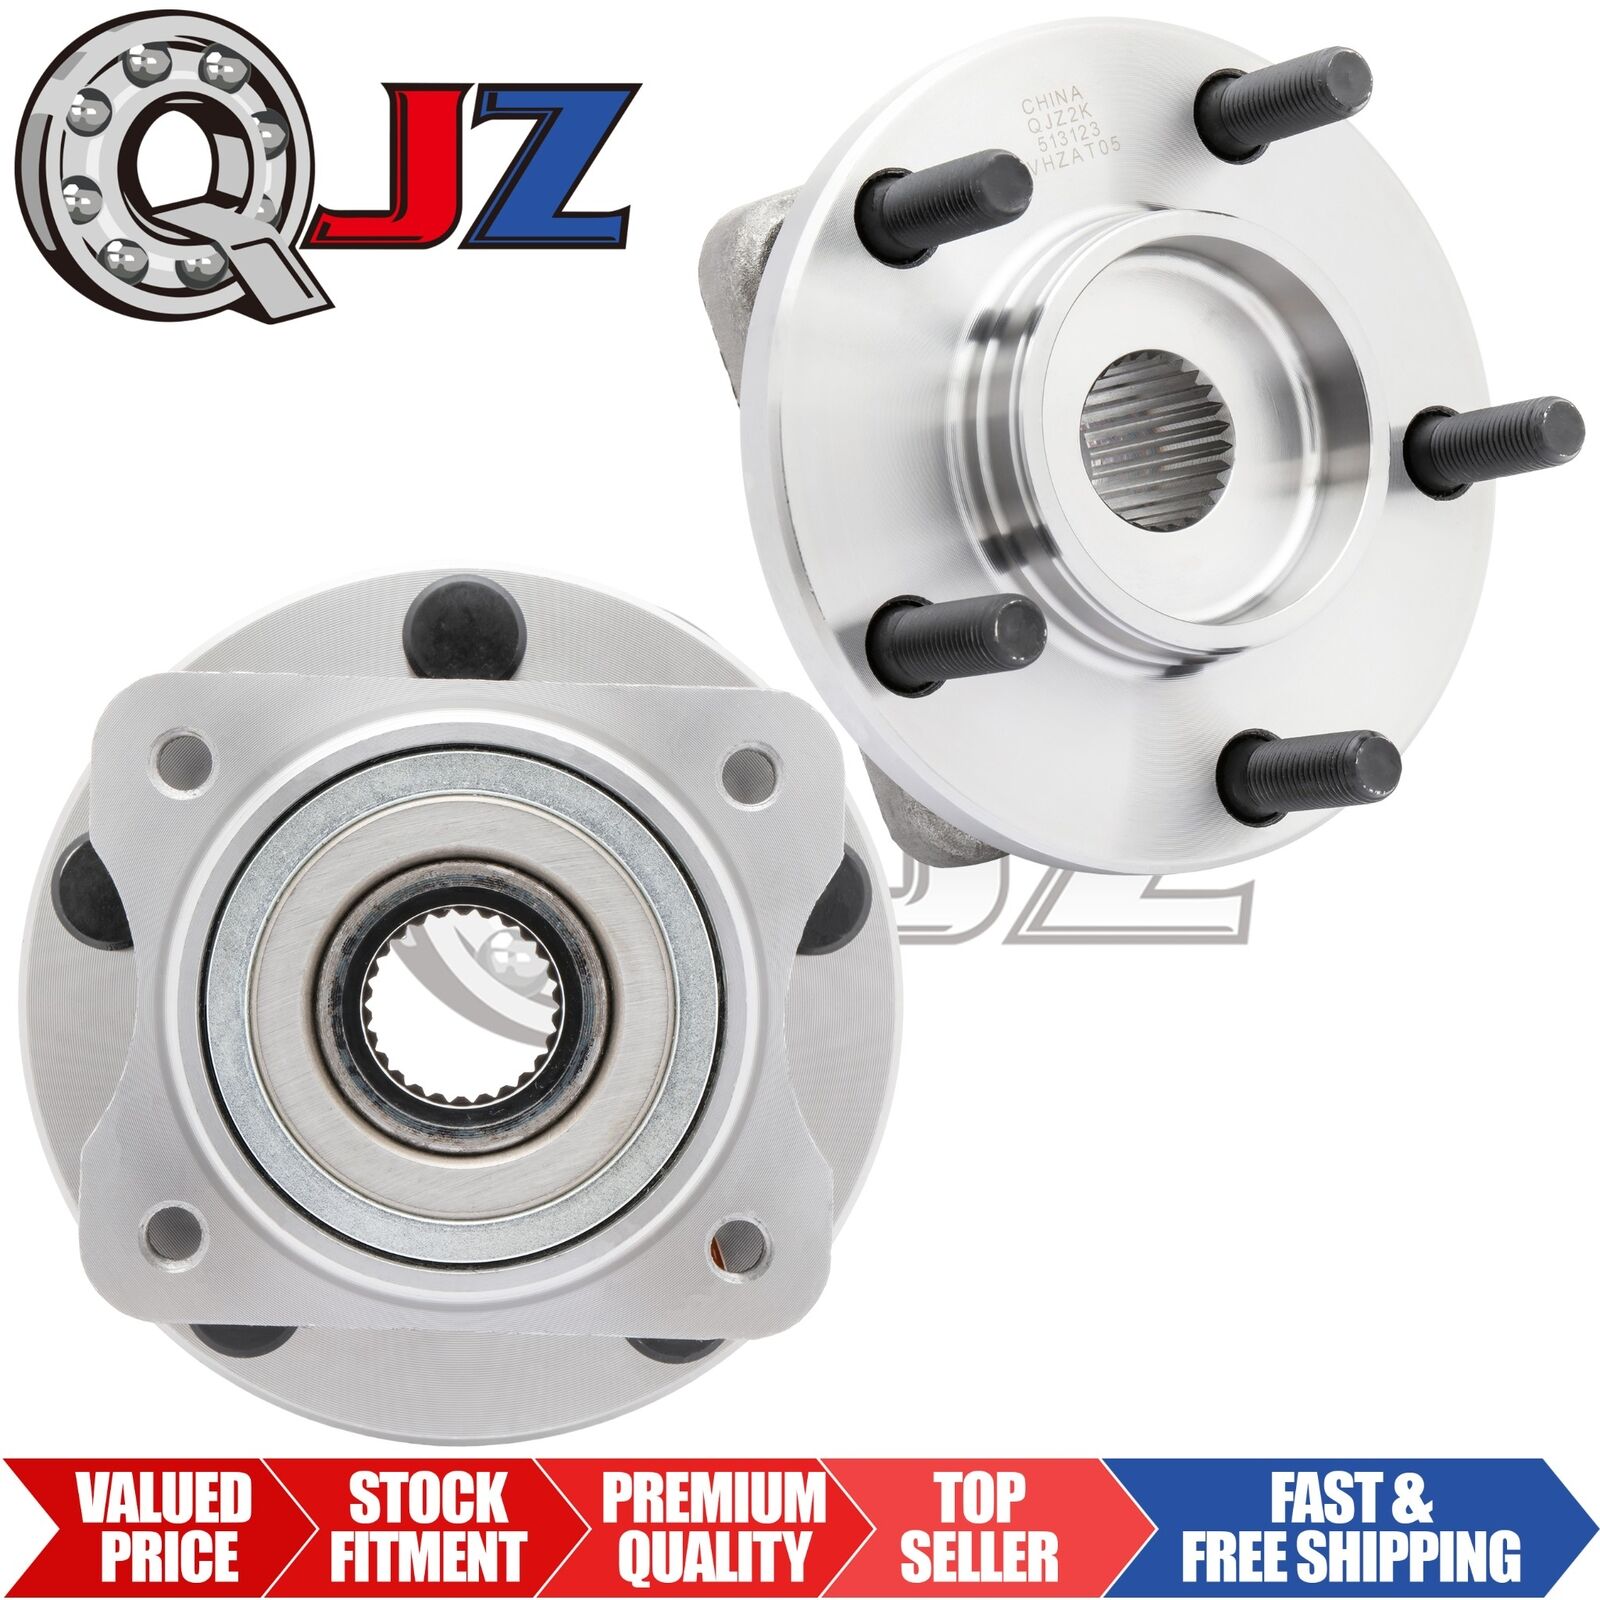 [FRONT(Qty.2)] Wheel Hub For 1996-2000 Plymouth Grand Voyager Van FWD/AWD-Model